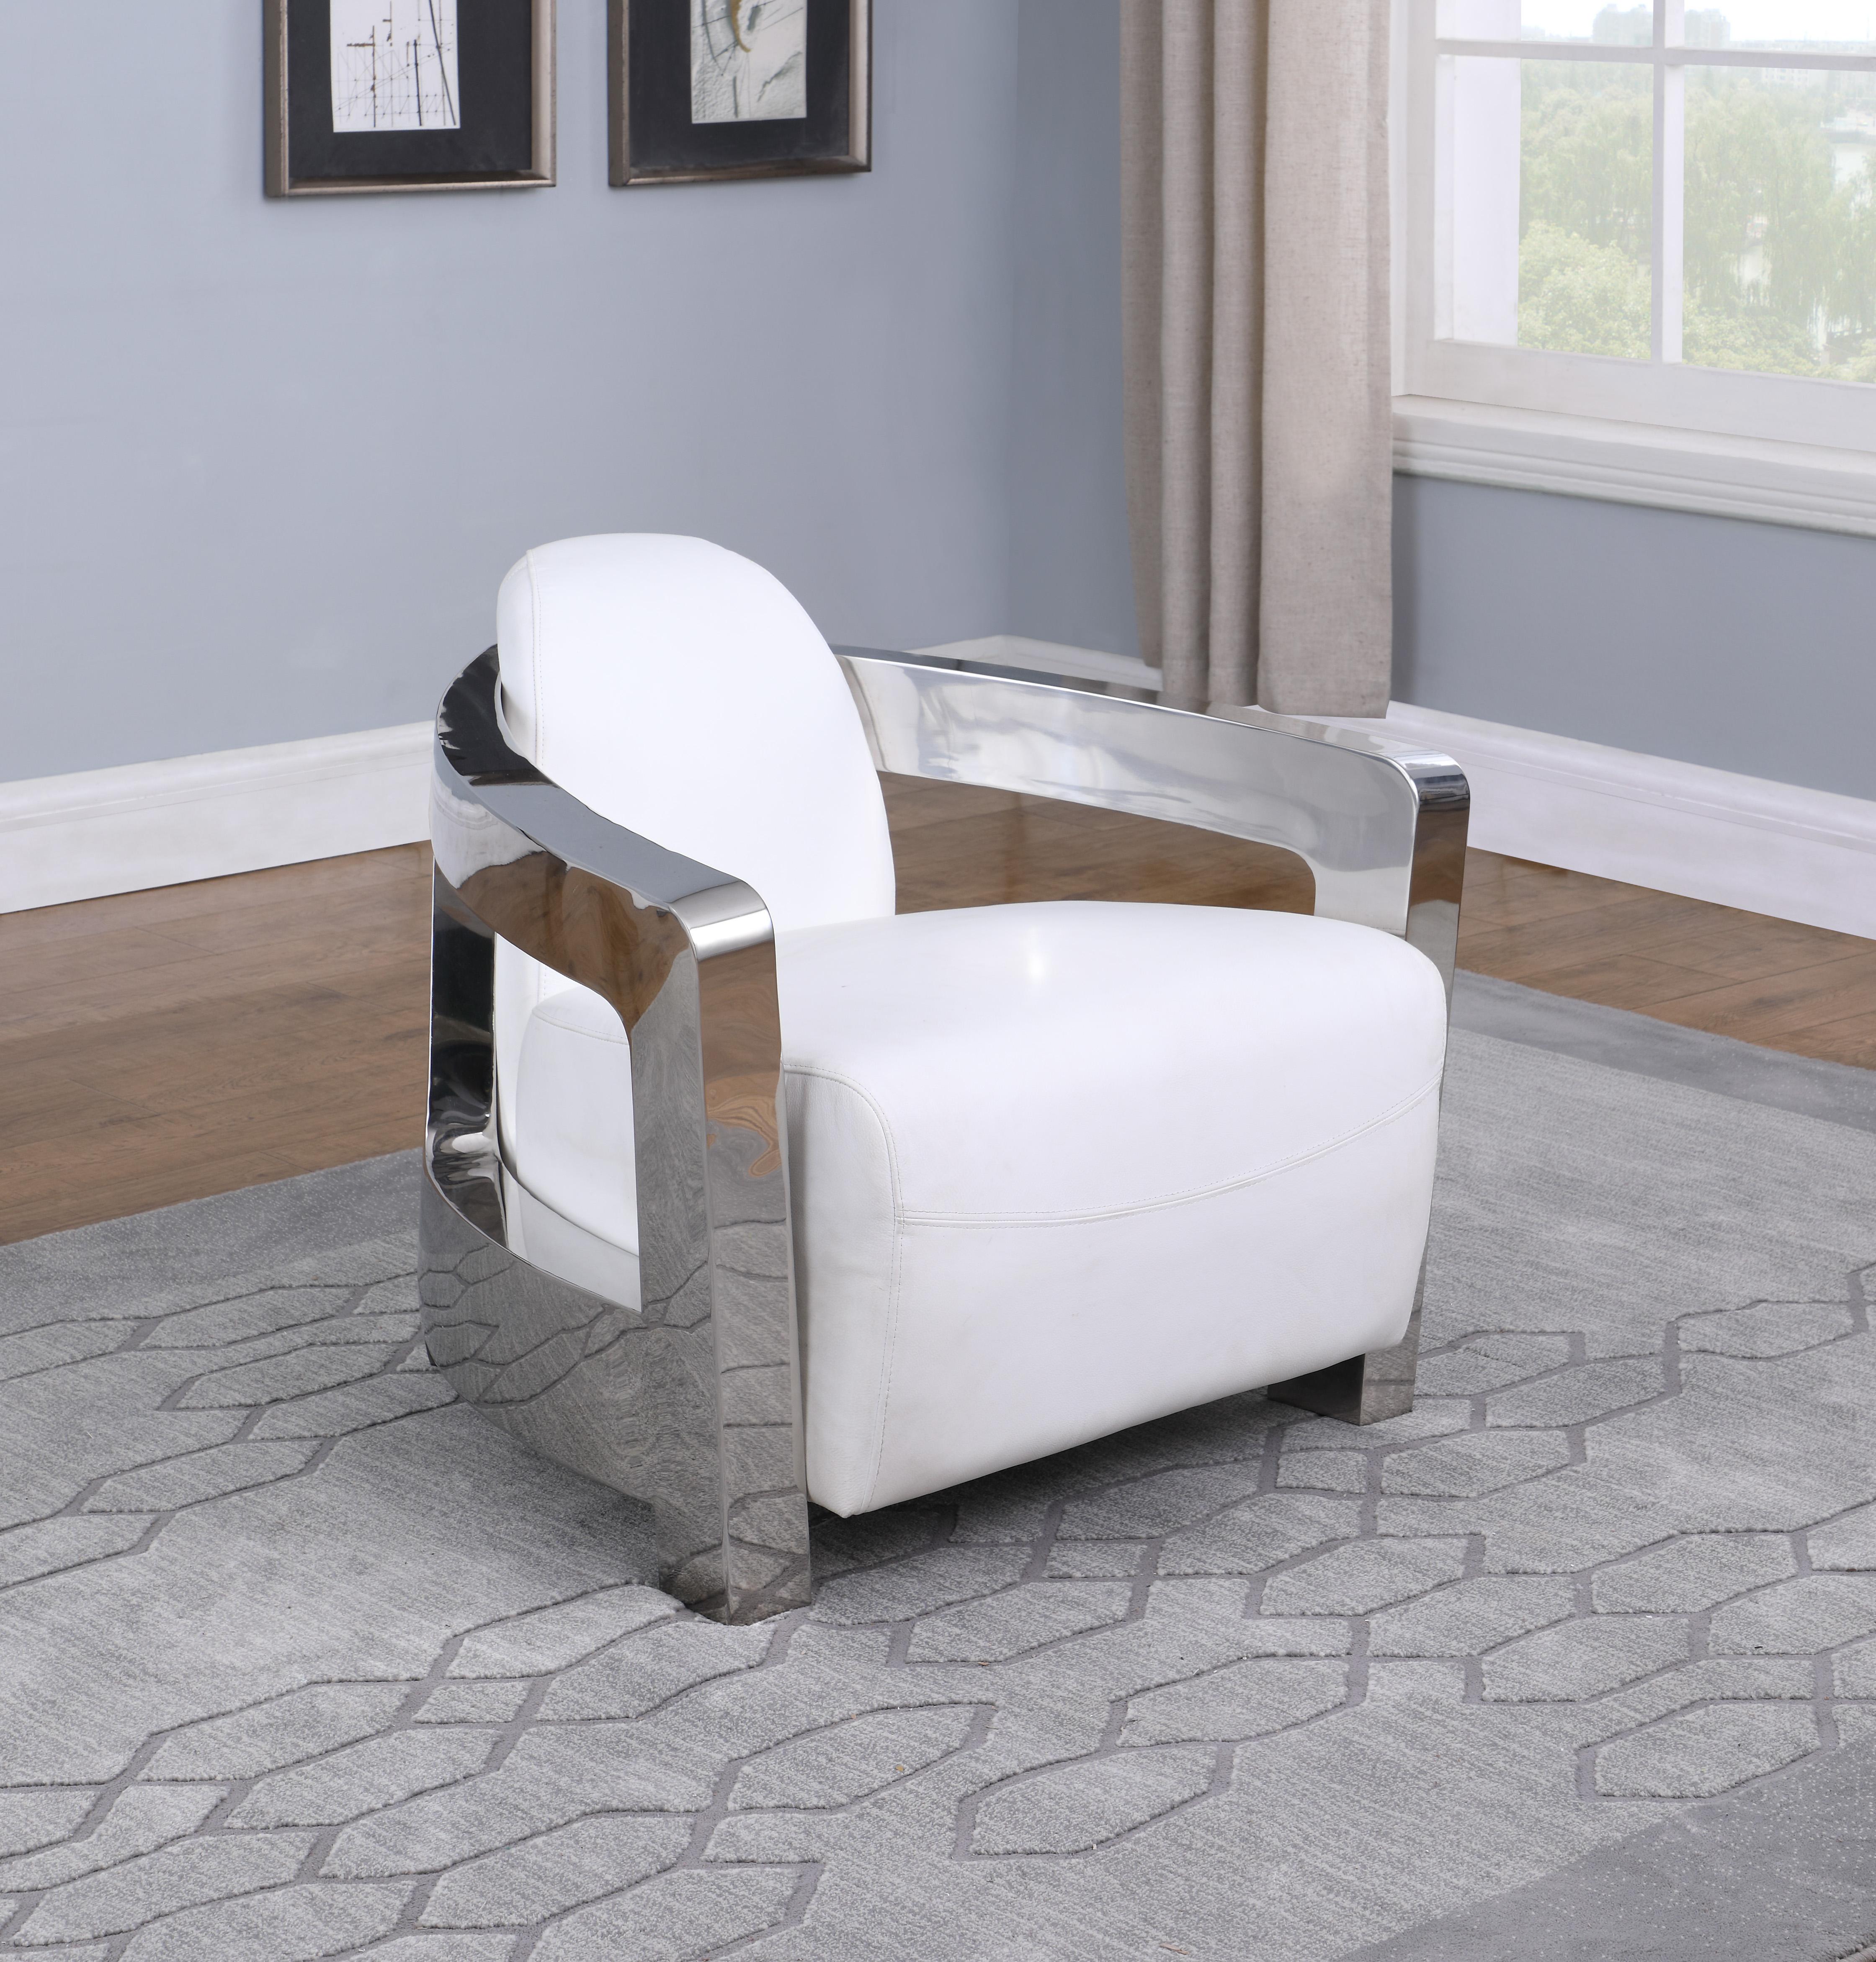 https://nyfurnitureoutlets.com/products/white-leather-stainless-steel-frame-accent-chair-contemporary-2099-acc-by-chintaly-imports/1x1/272985-7-073510877701.jpg